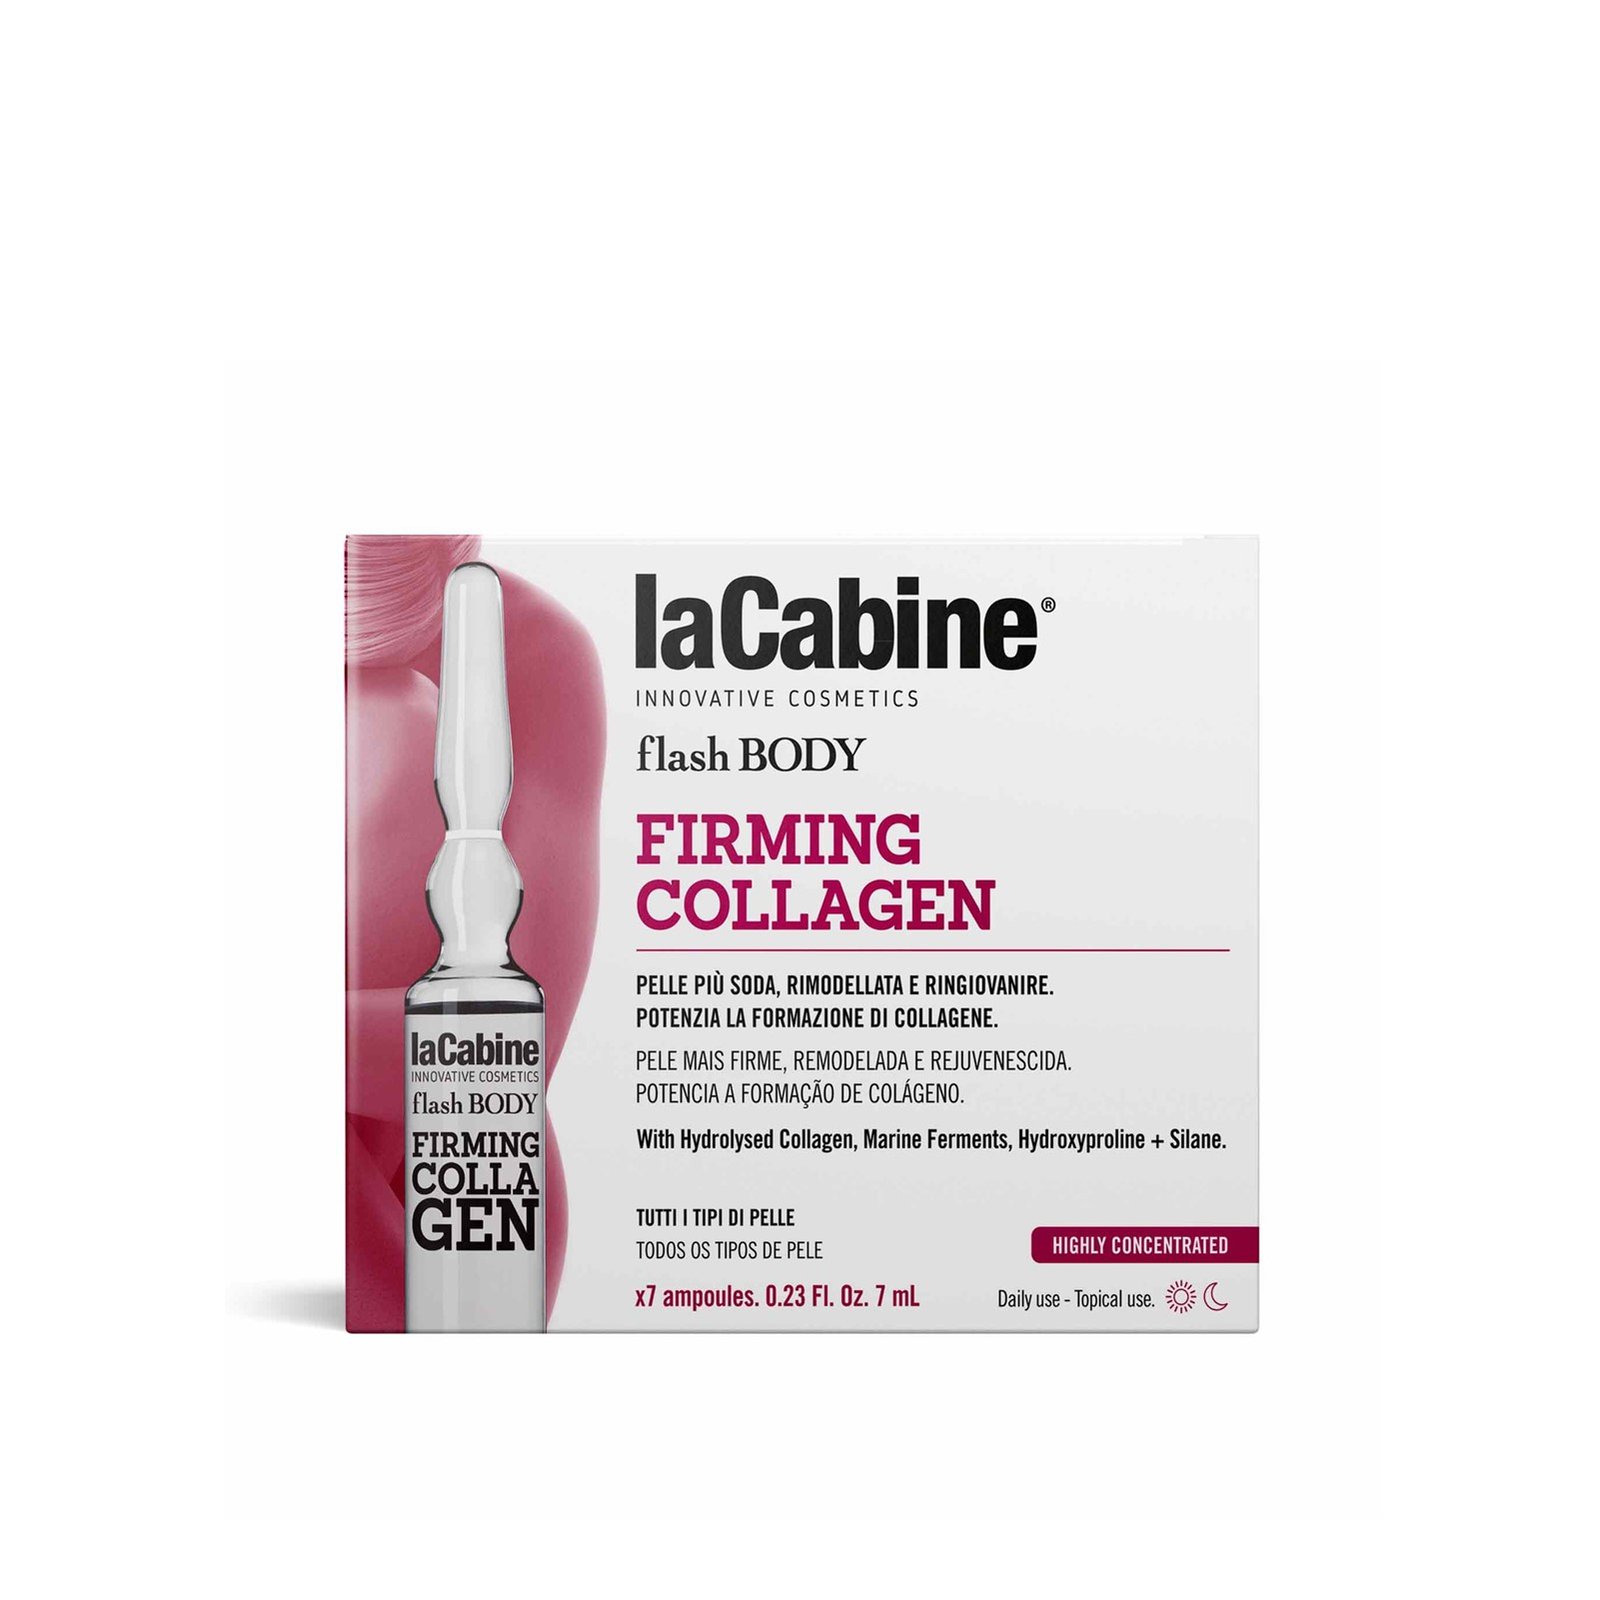 La Cabine Flash Body Firming Collagen Concentrated Ampoules 7x7ml